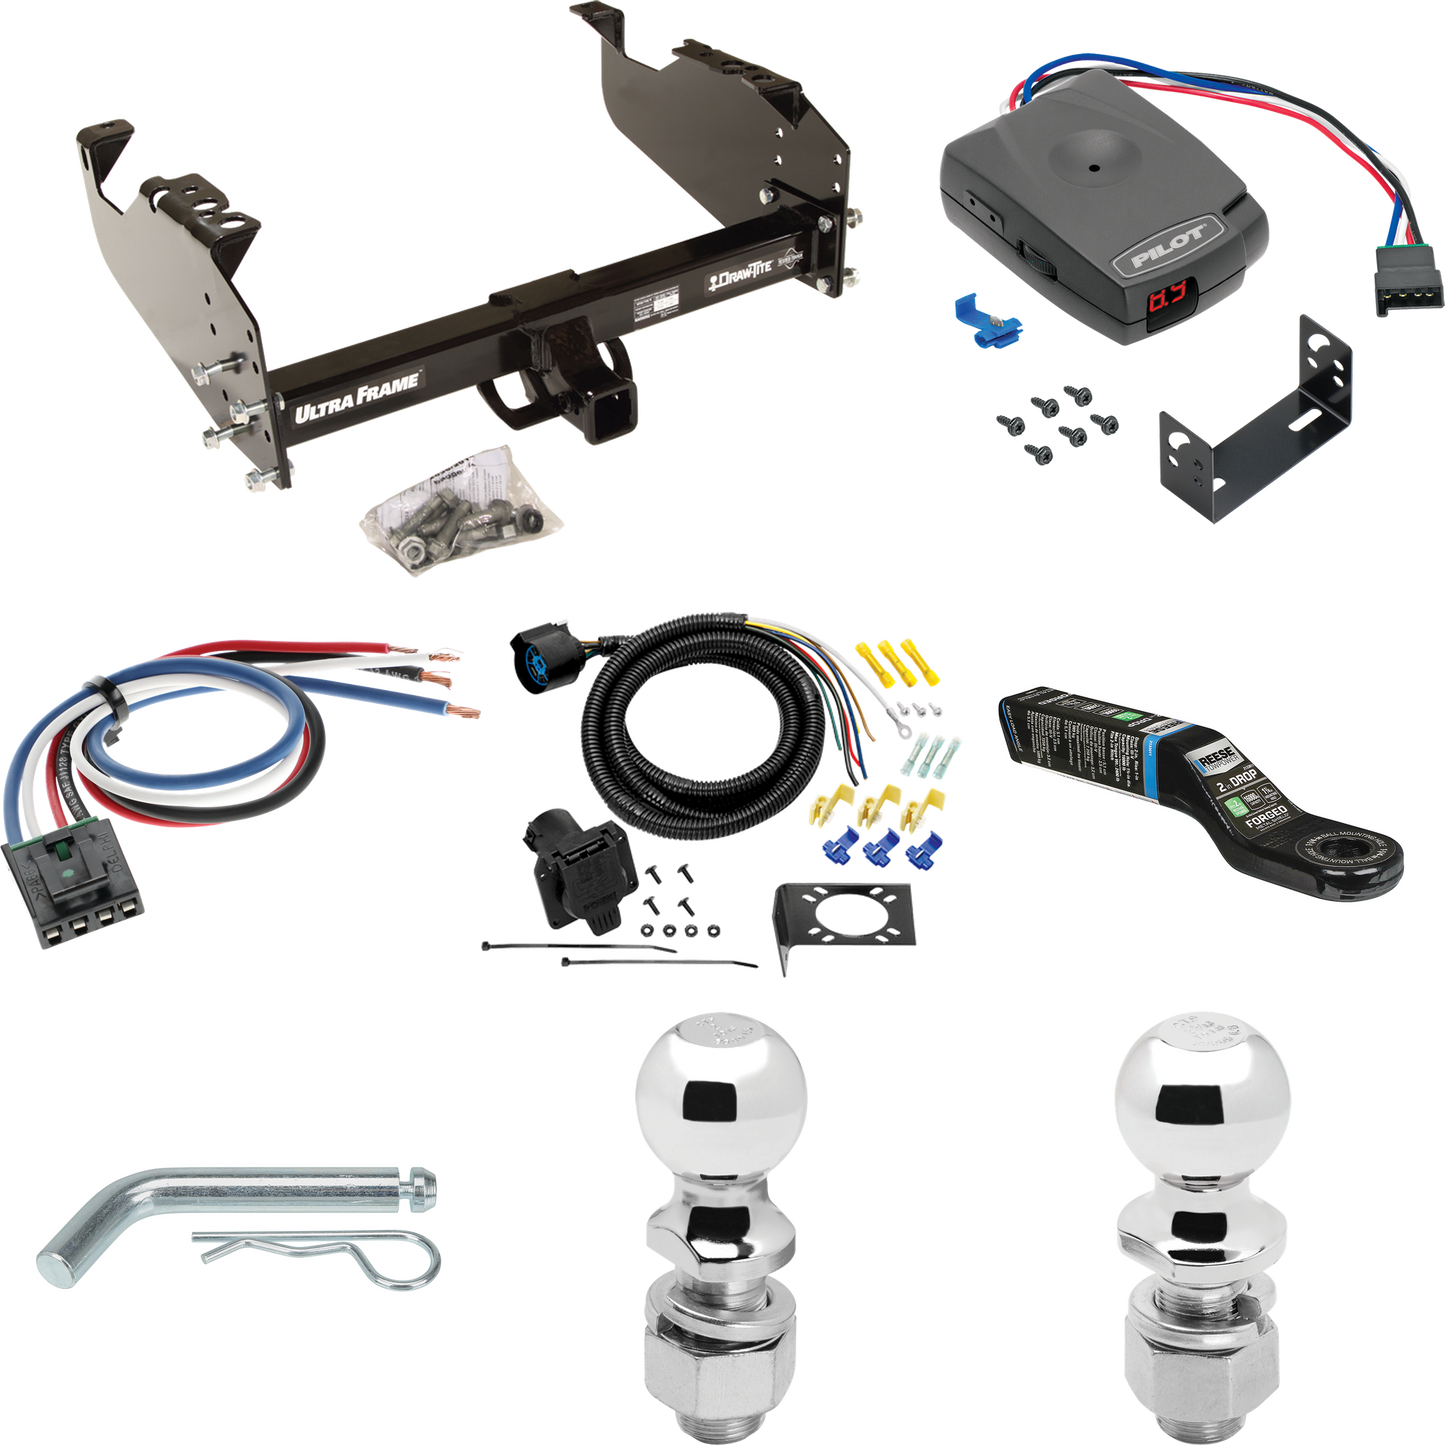 Fits 1985-1986 Chevrolet K30 Trailer Hitch Tow PKG w/ Pro Series Pilot Brake Control + Generic BC Wiring Adapter + 7-Way RV Wiring + 2" & 2-5/16" Ball & Drop Mount (For w/34" Wide Frames Models) By Draw-Tite